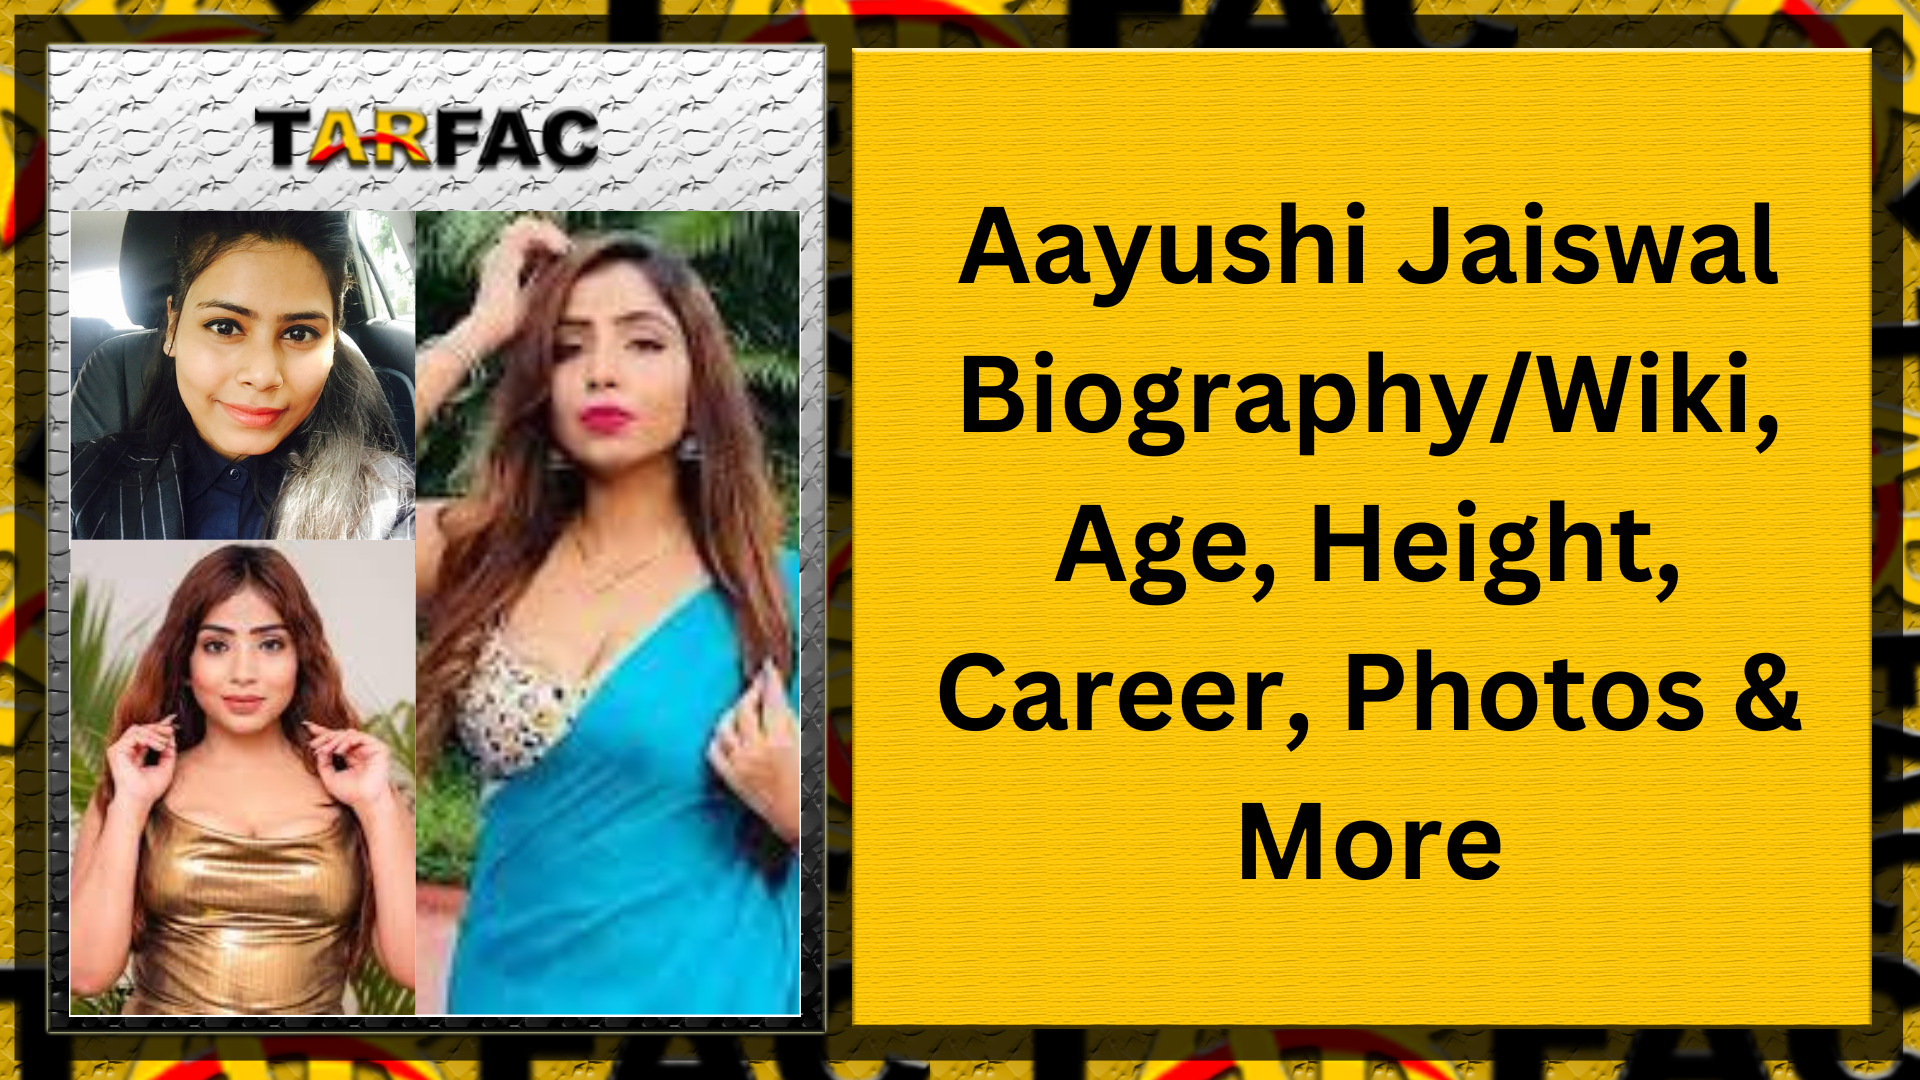 You are currently viewing Aayushi Jaiswal Biography/Wiki, Age, Height, Career, Photos & More